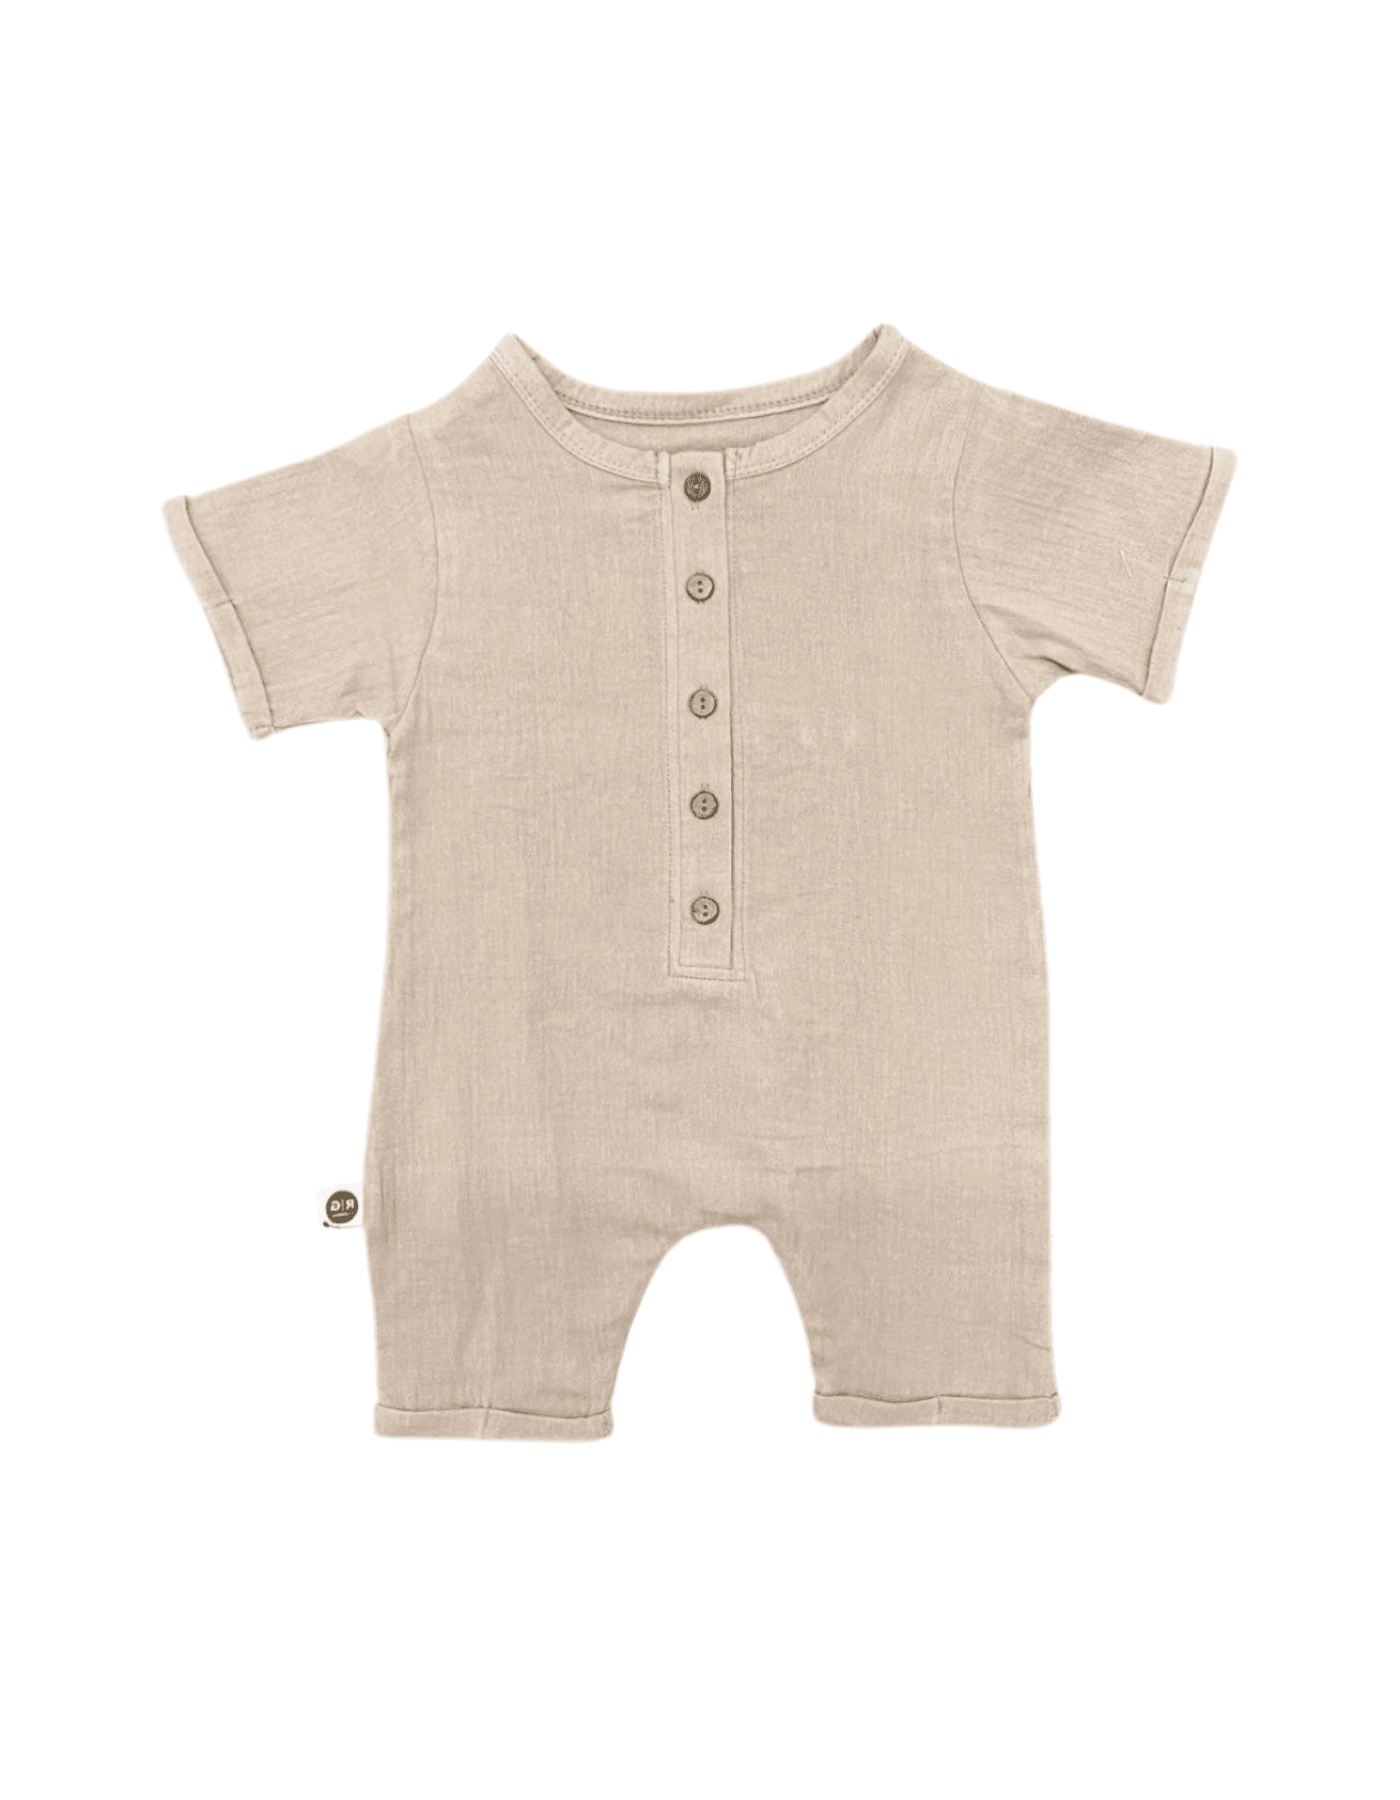 organic baby clothes 